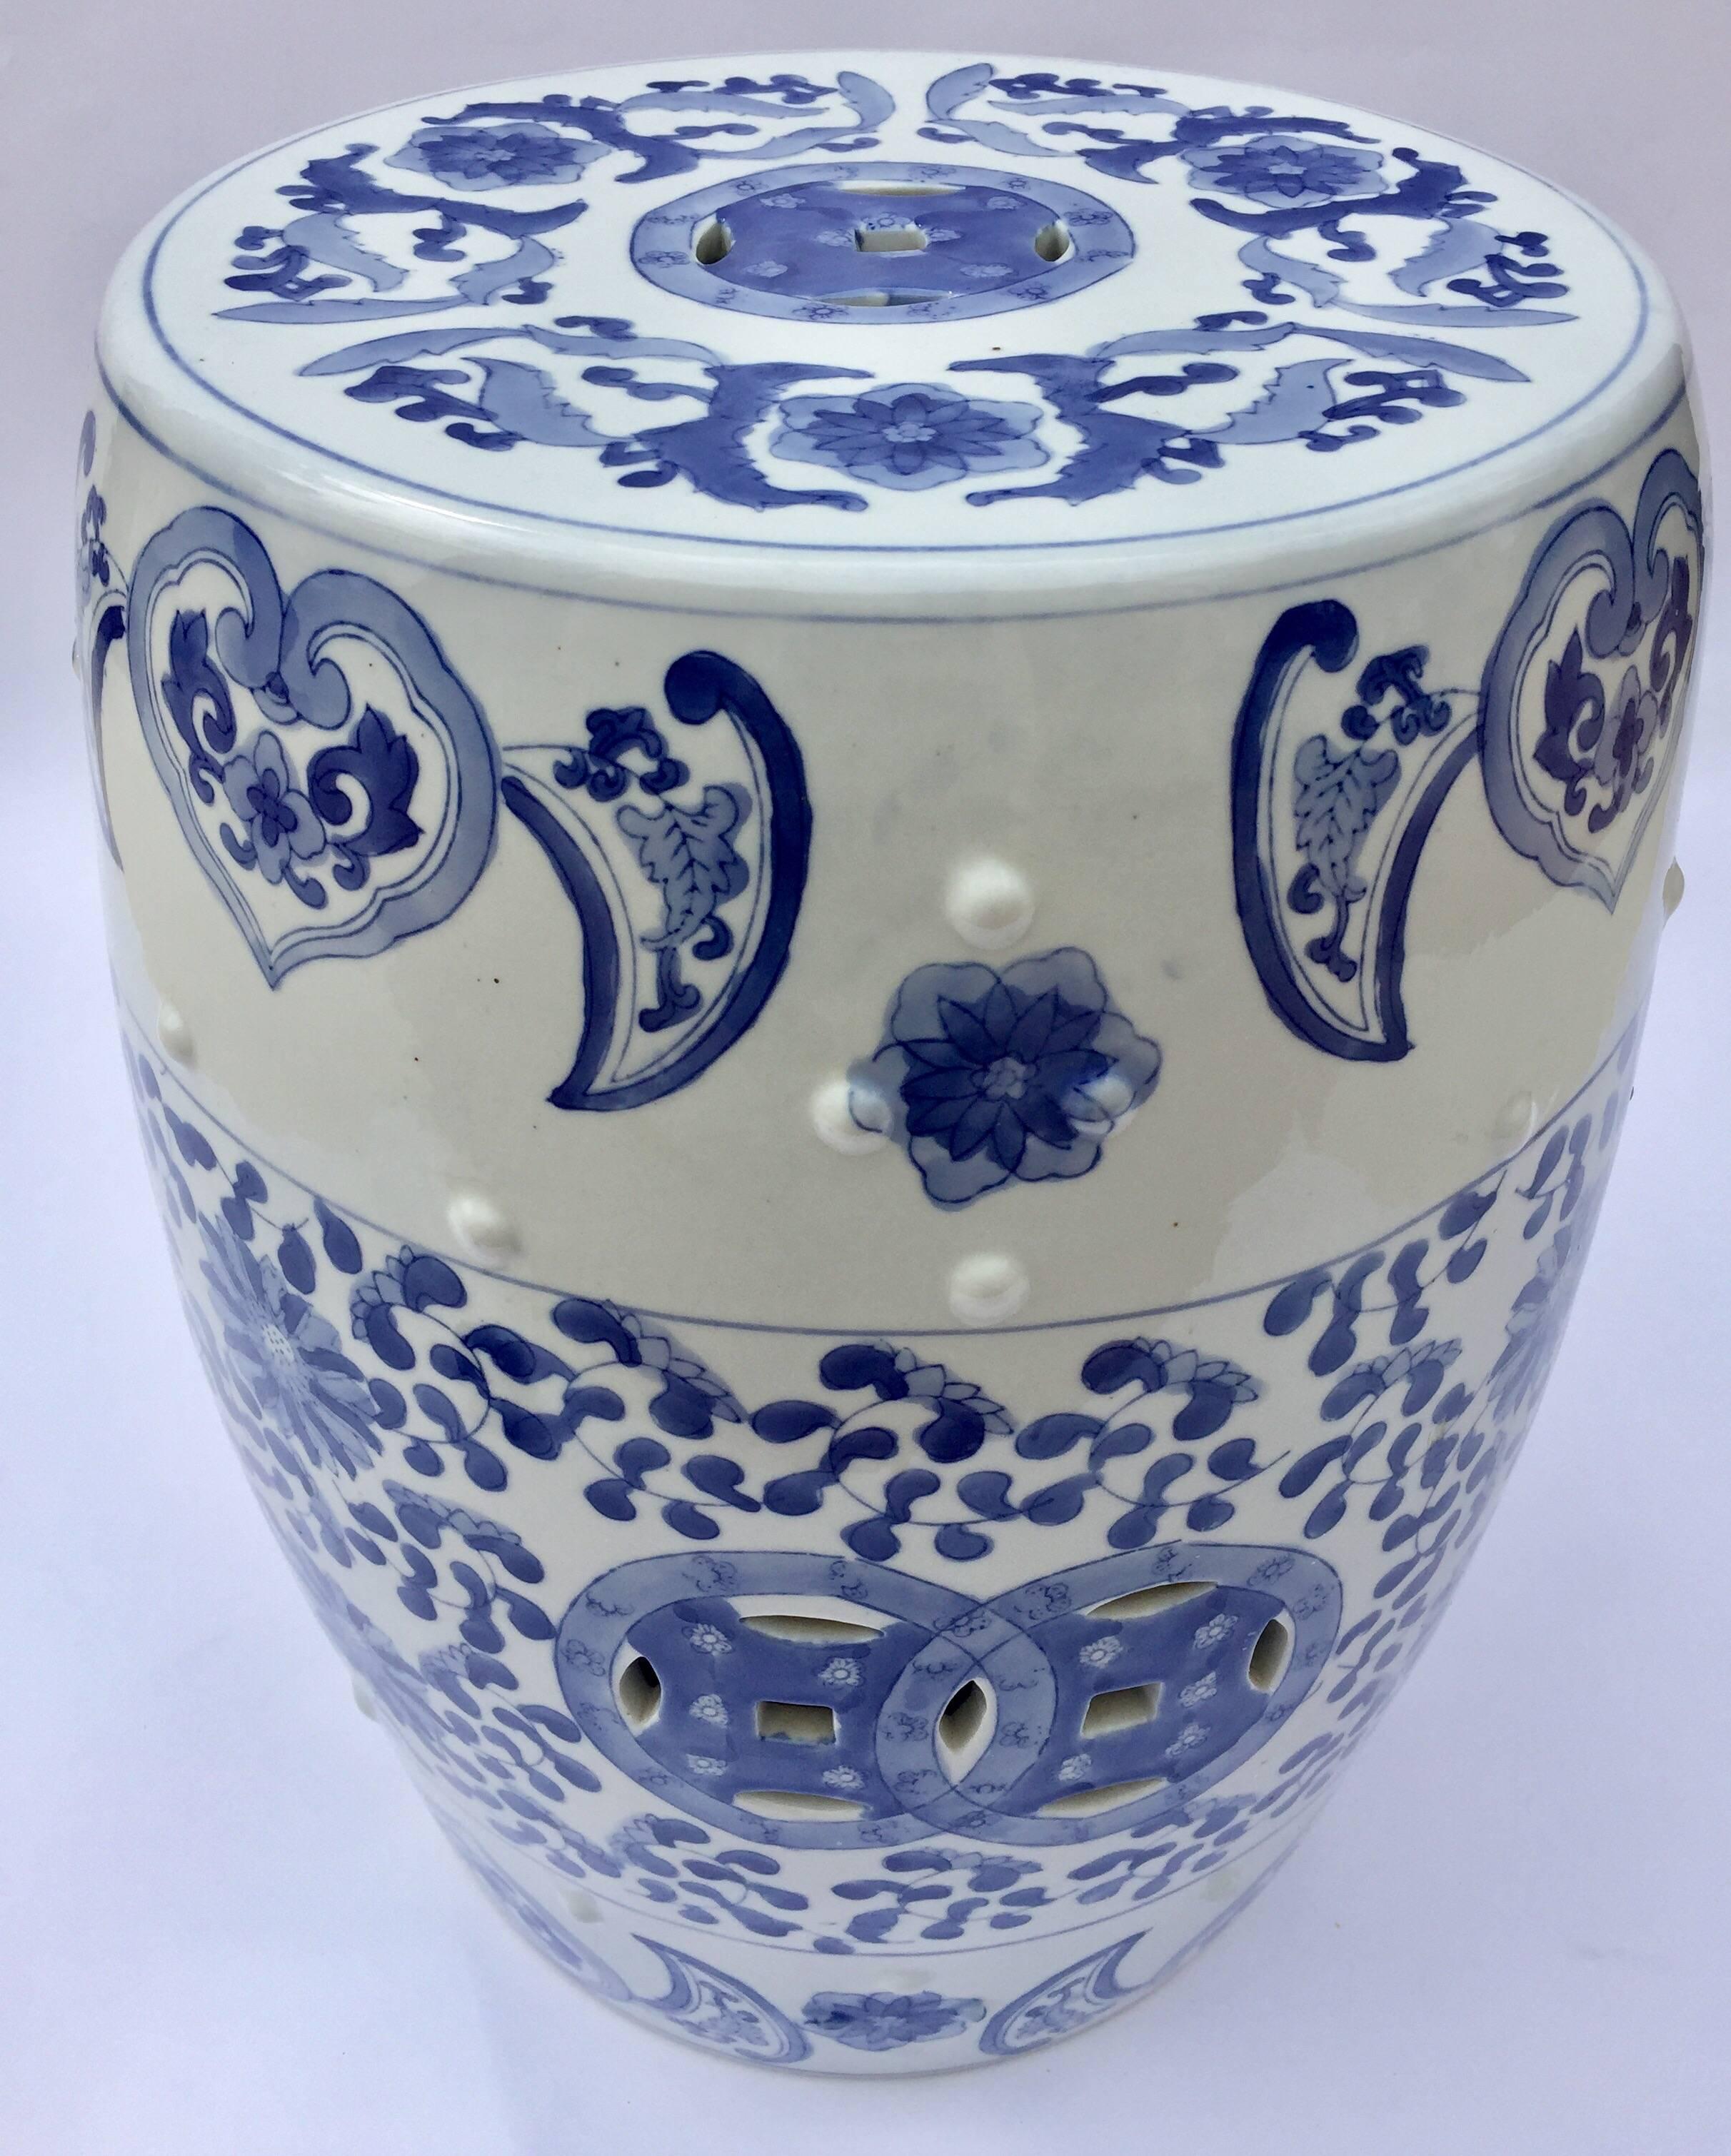 Ceramic Asian Garden Seat in Blue and White Floral Motifs For Sale 2